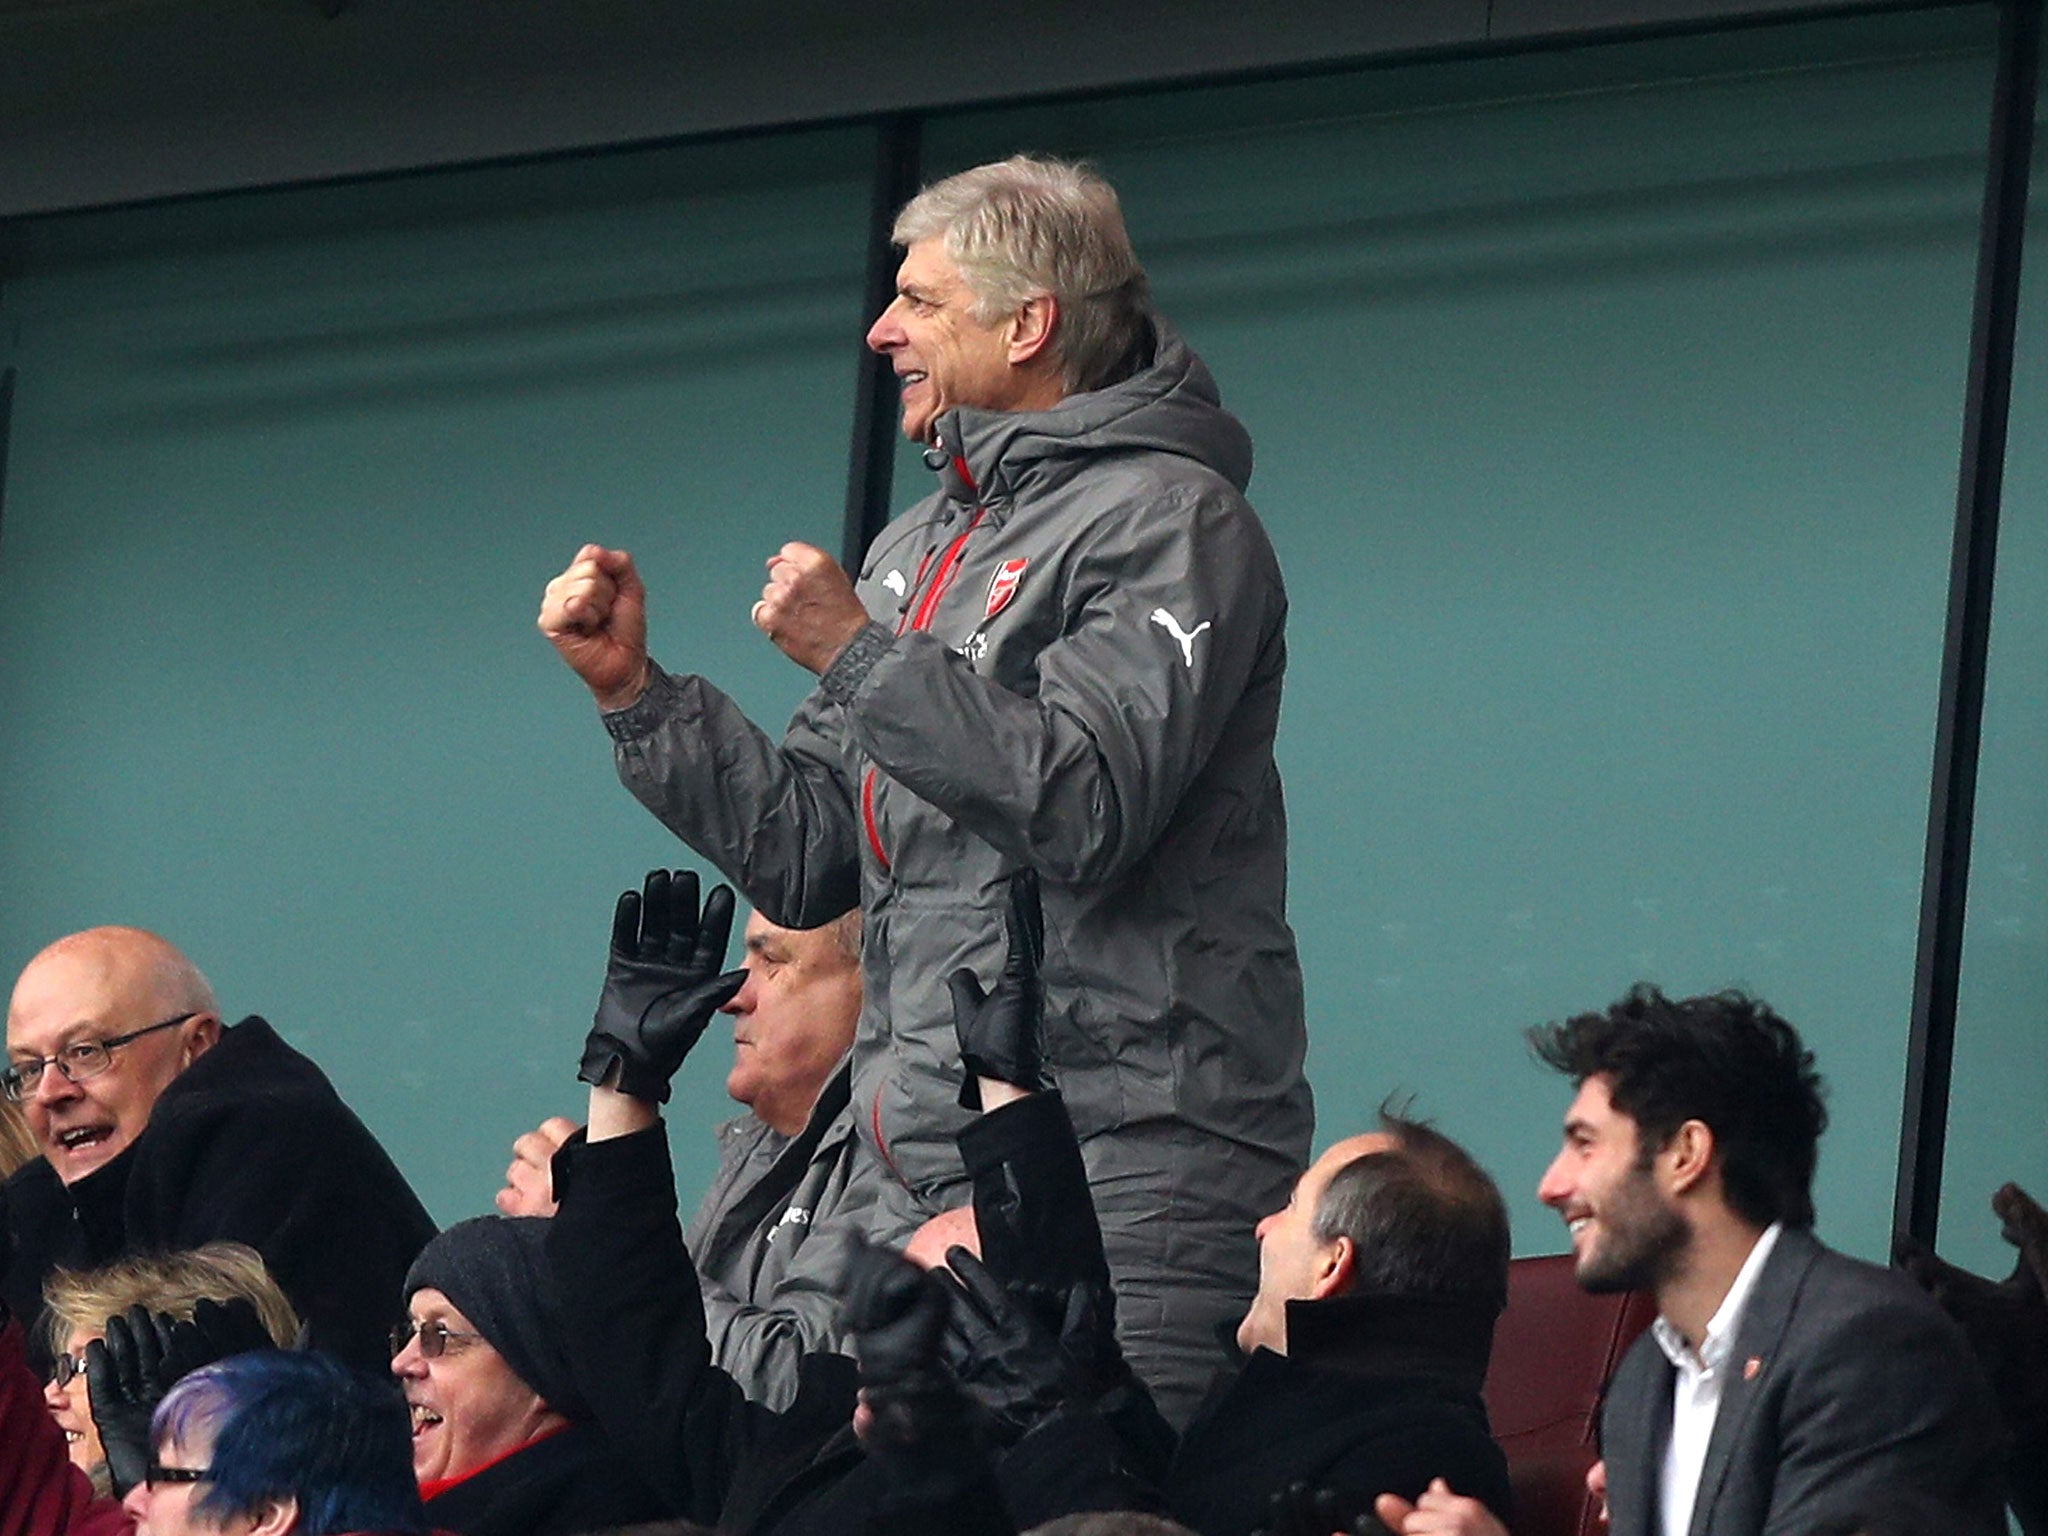 Wenger celebrates after his side's first goal at the Emirates Stadium